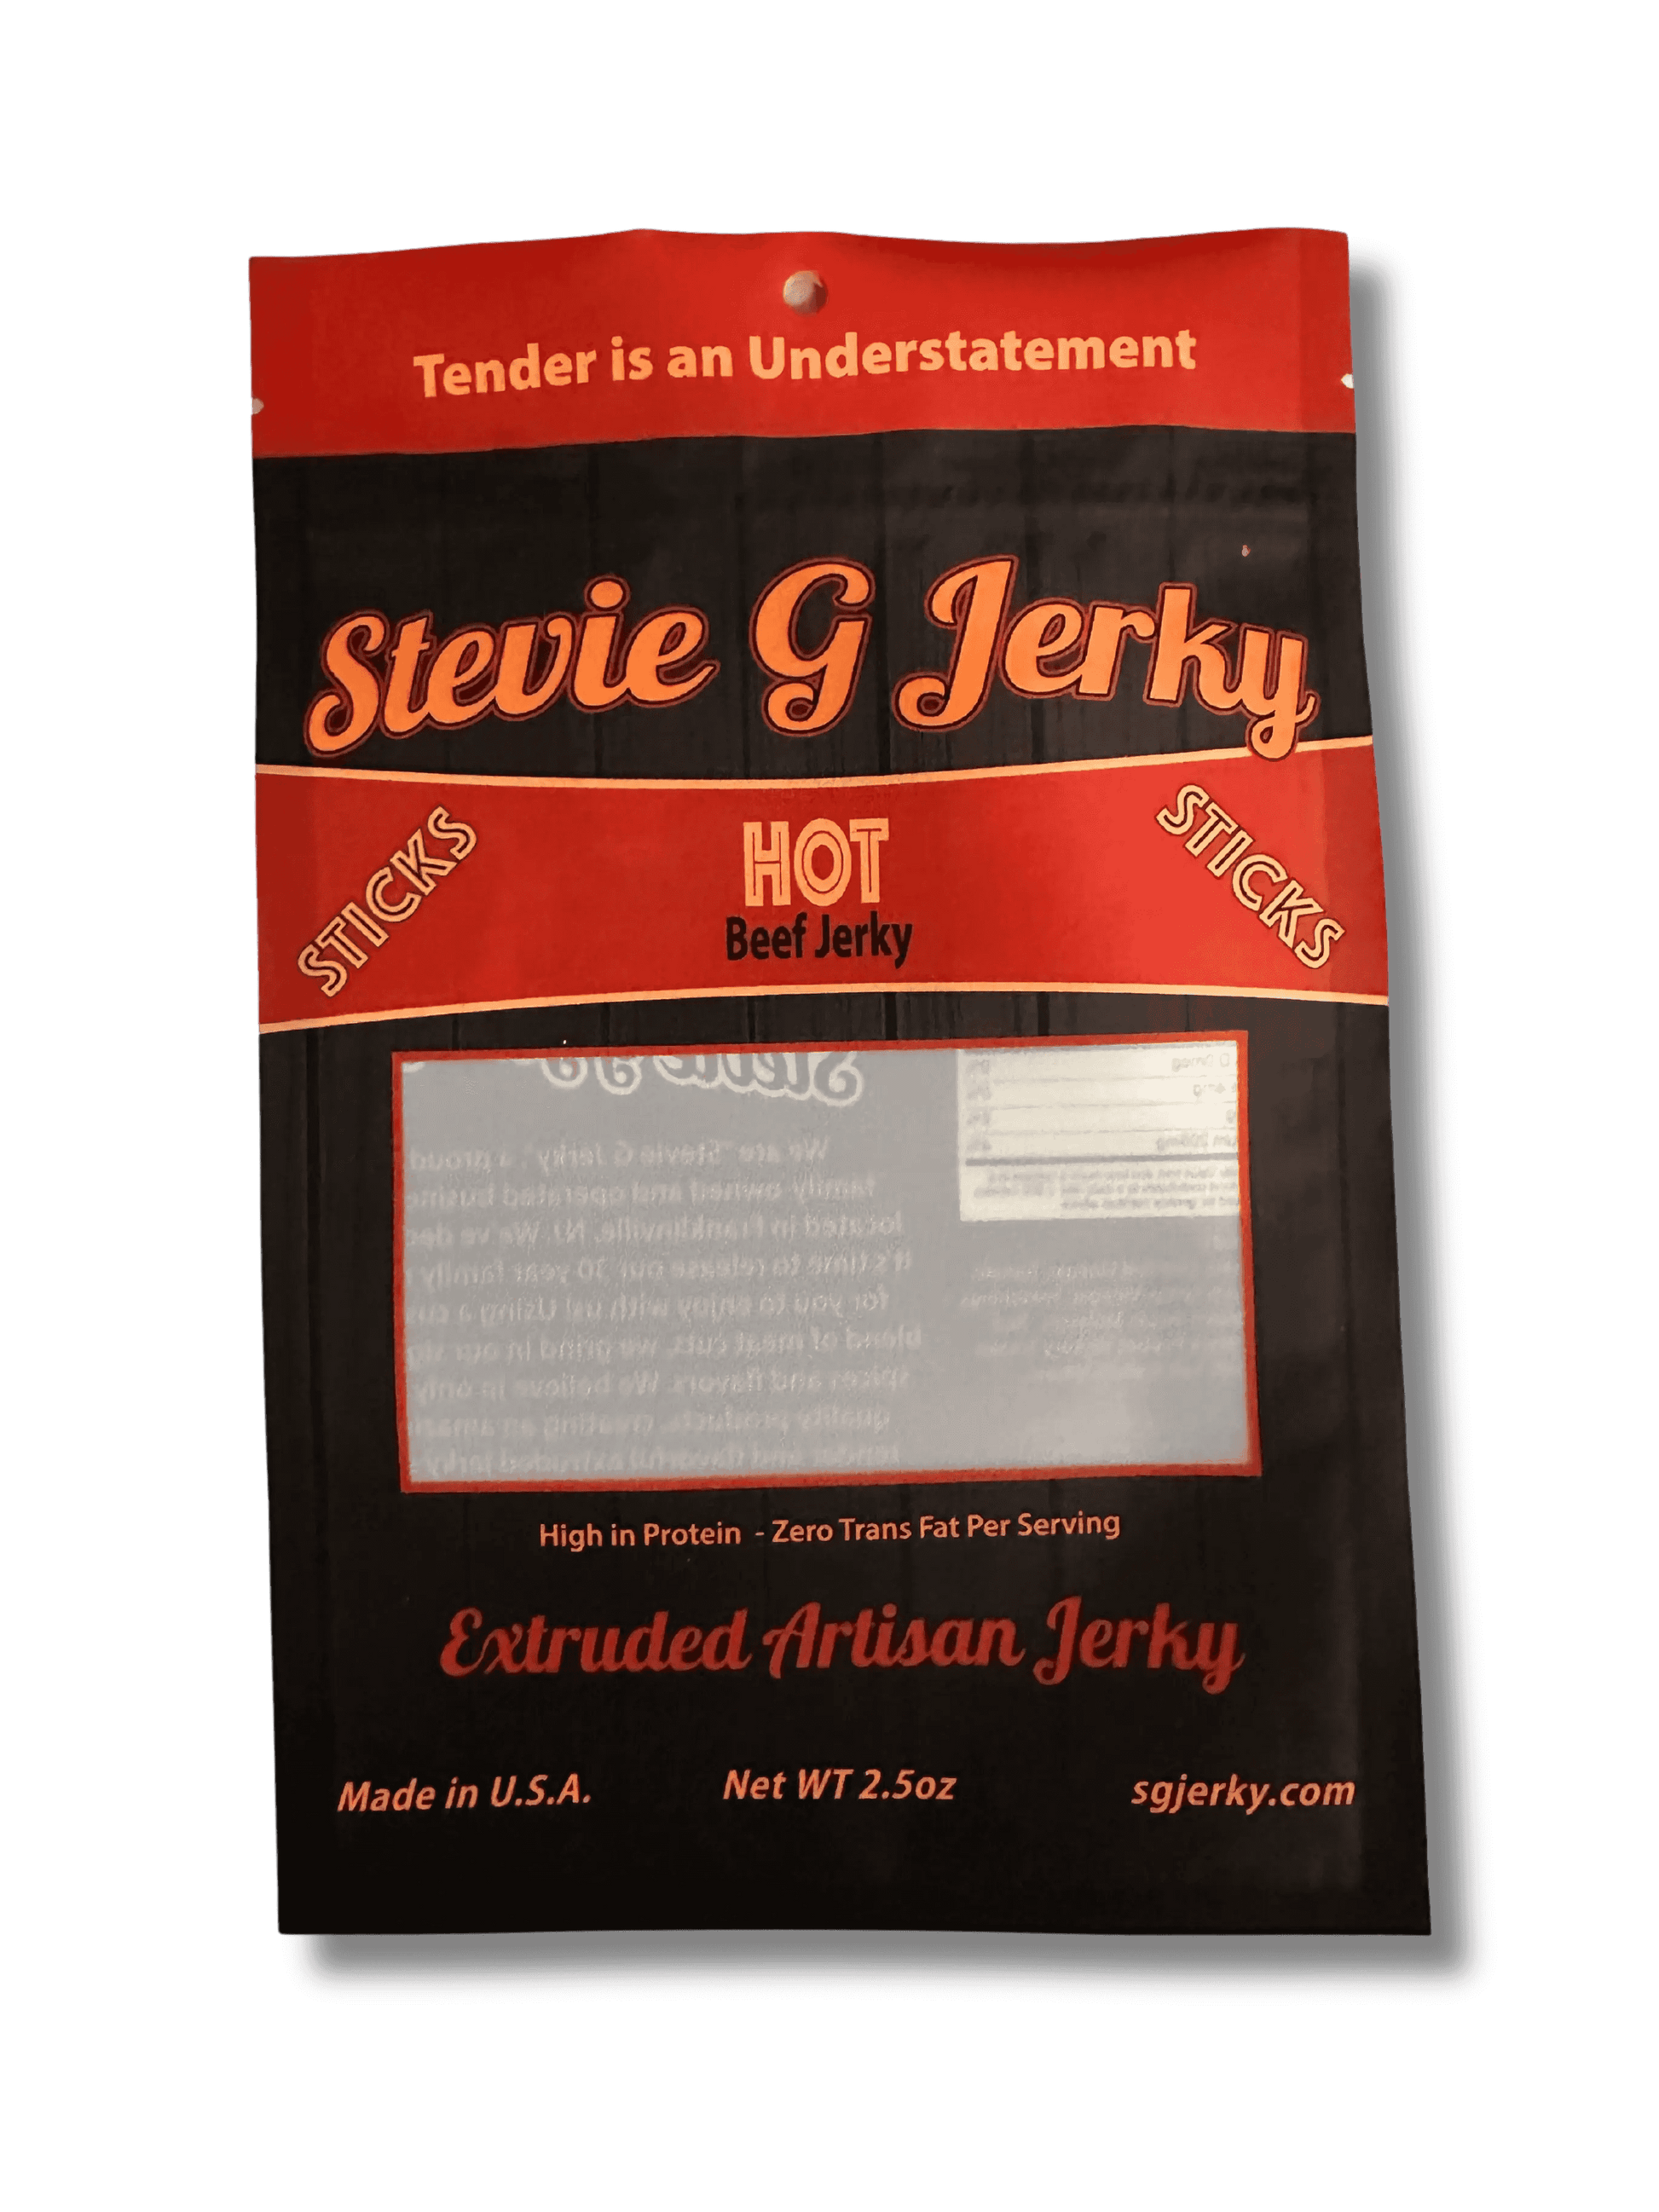 Steve G's hot and spicy beef jerky